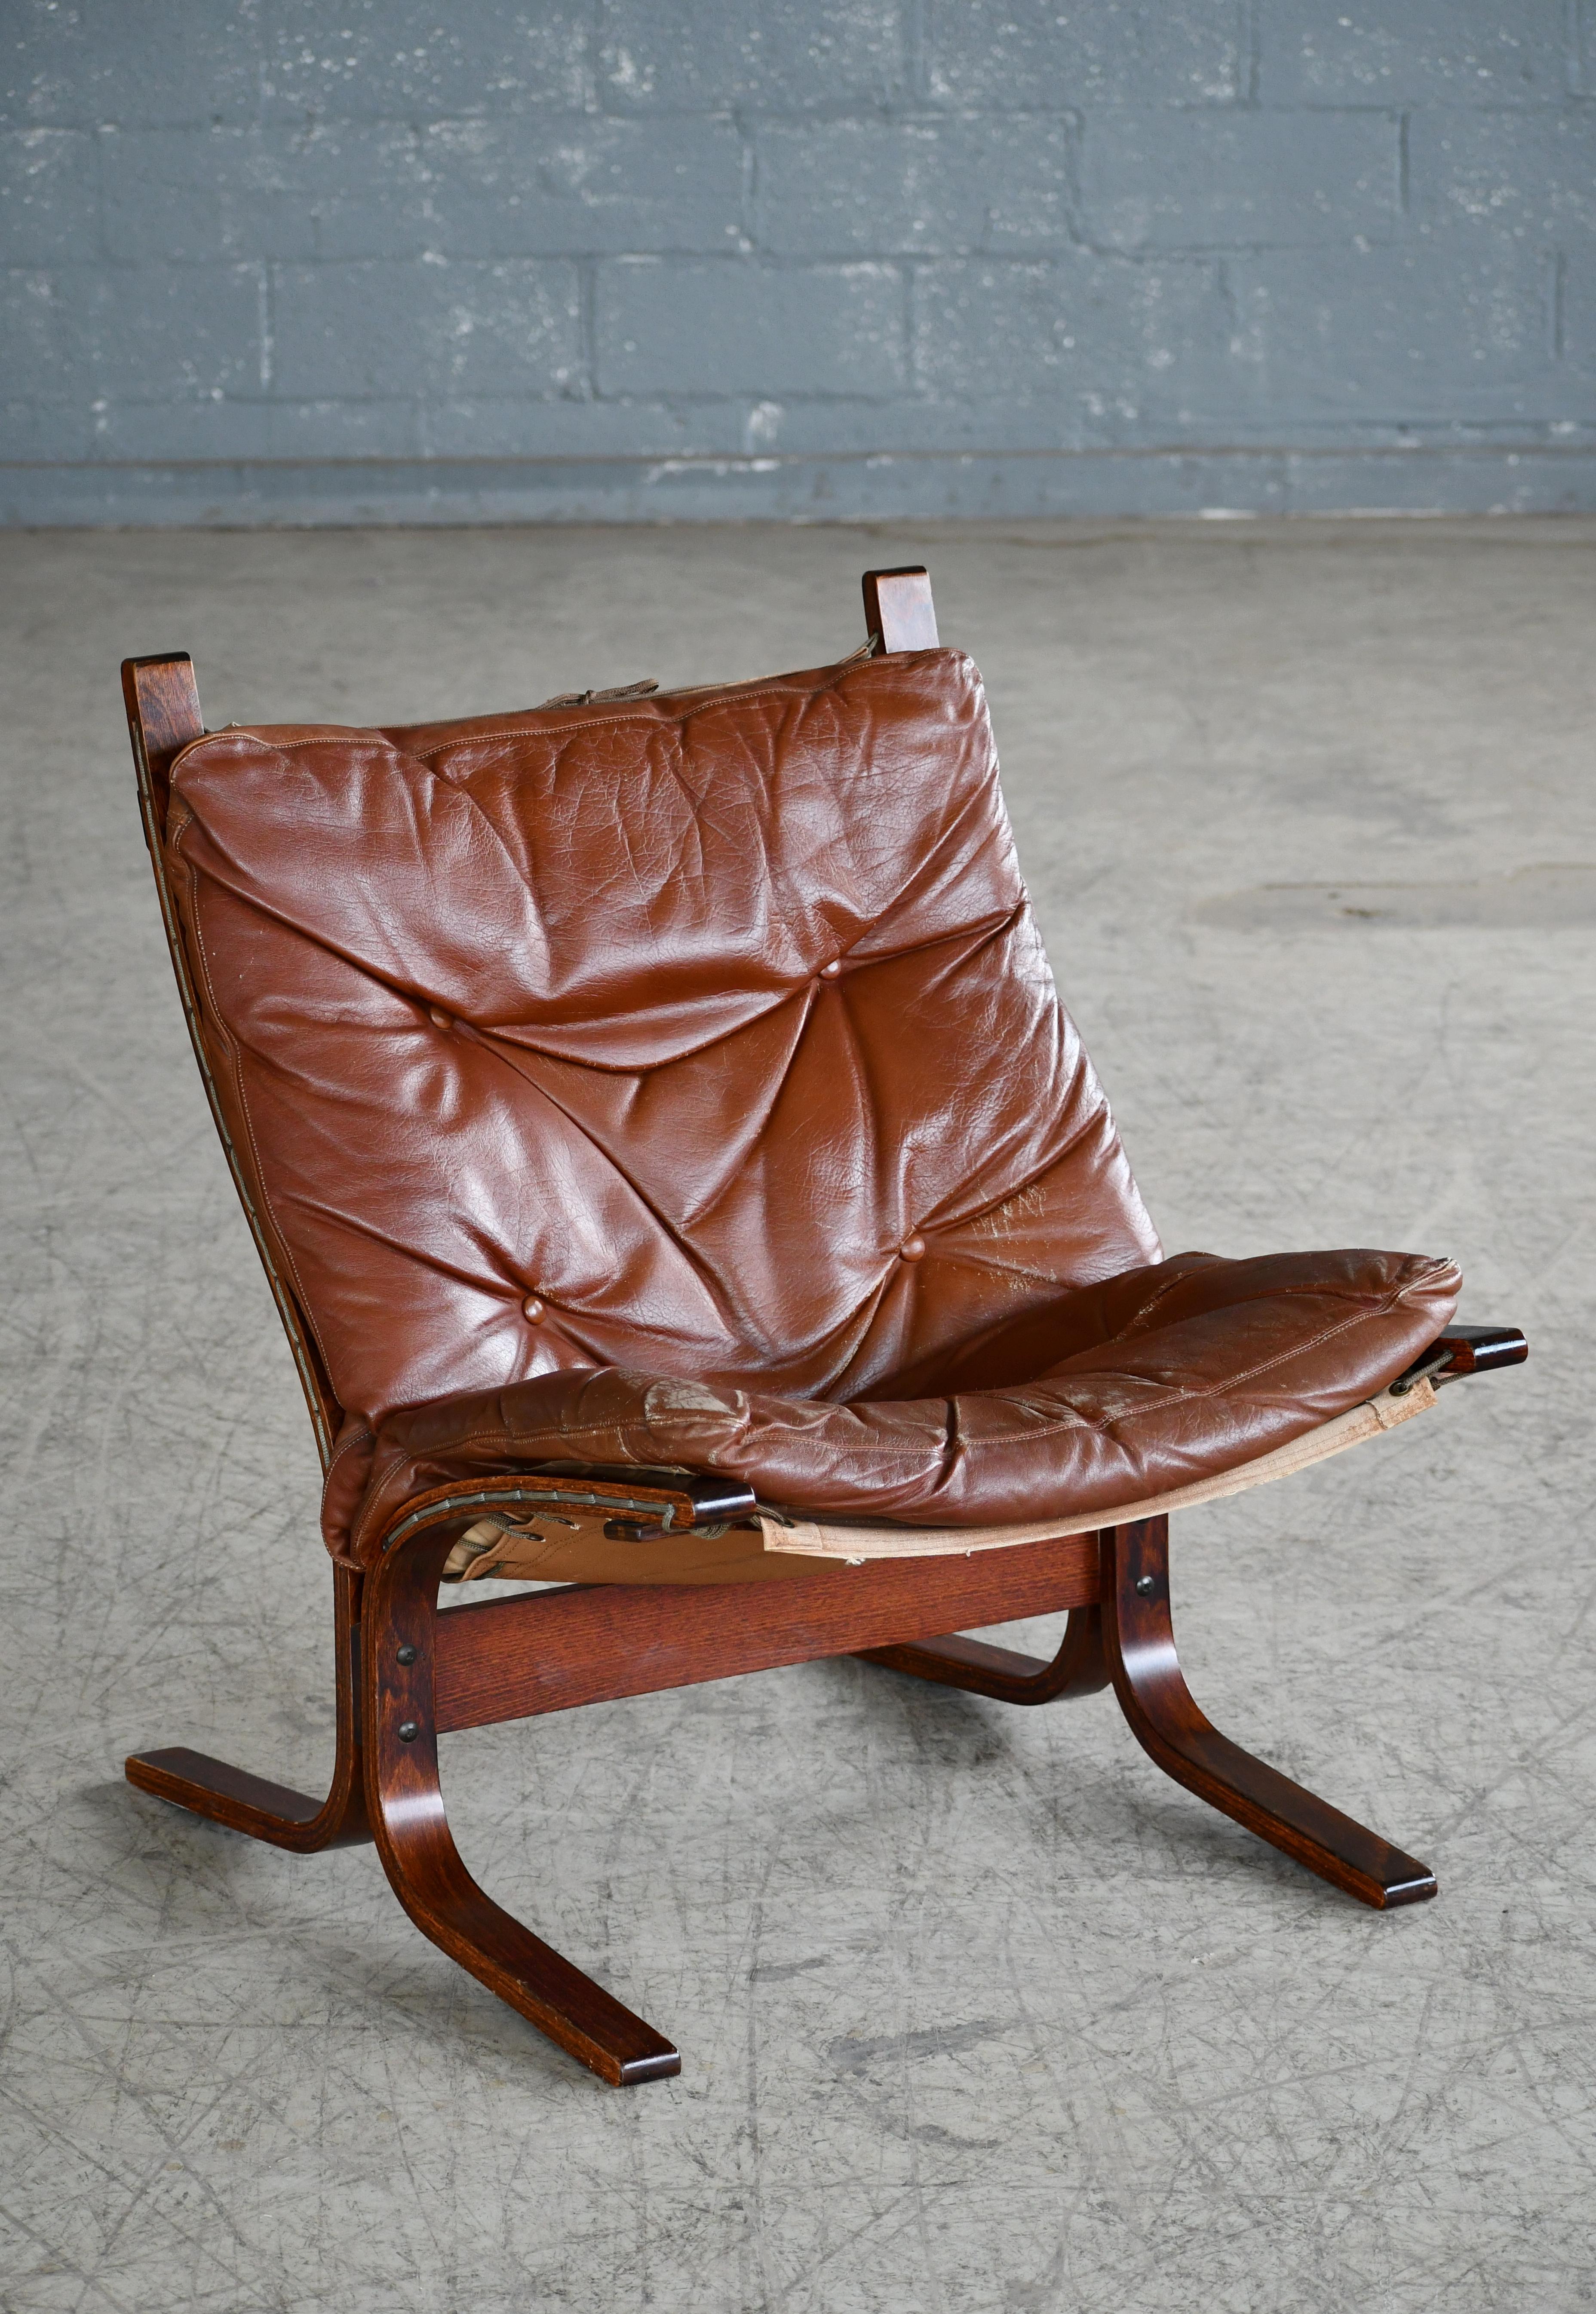 Siesta sling chair by iconic Norwegian designer Ingmar Relling. Manufactured in the late 1960s by Westnofa. The lounge chair features a jacaranda stained beechwood frame and rich cappuccino brown leather upholstery. This chair has been prized for